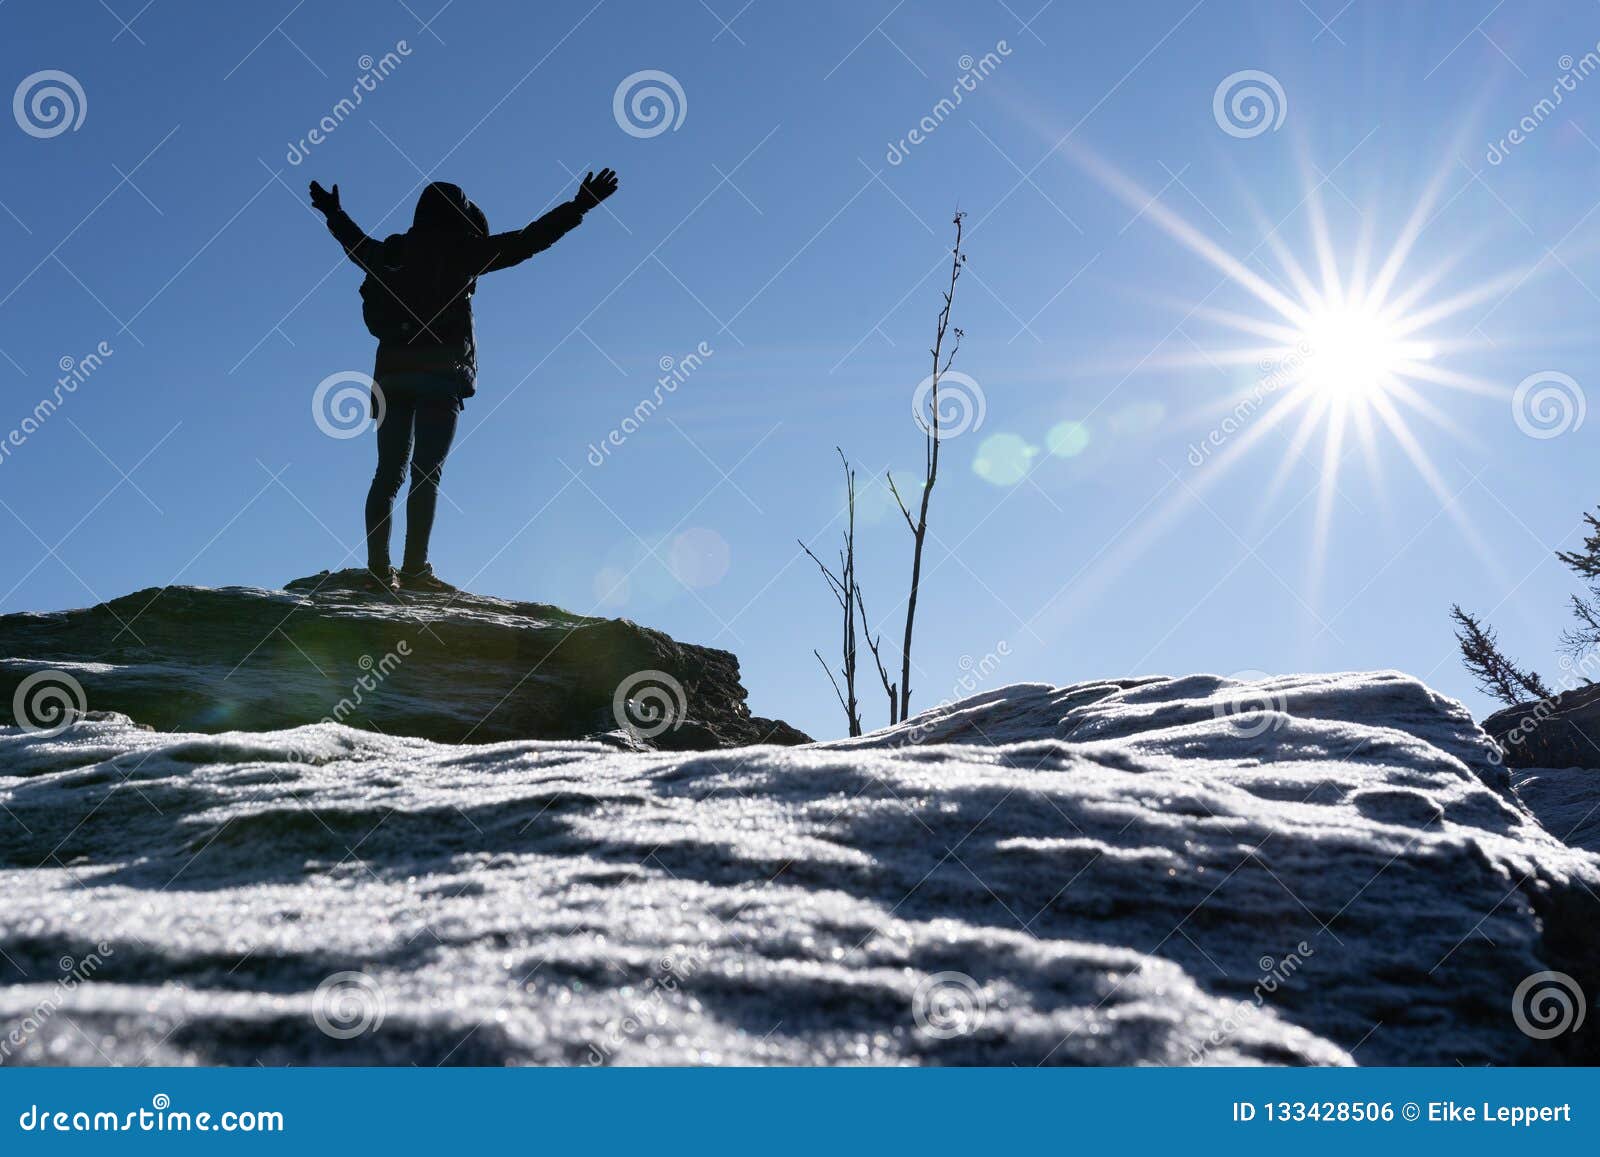 cheering woman hiker open arms at mountain peak backlit with heavy lensflare and ice crystalls in the foreground.